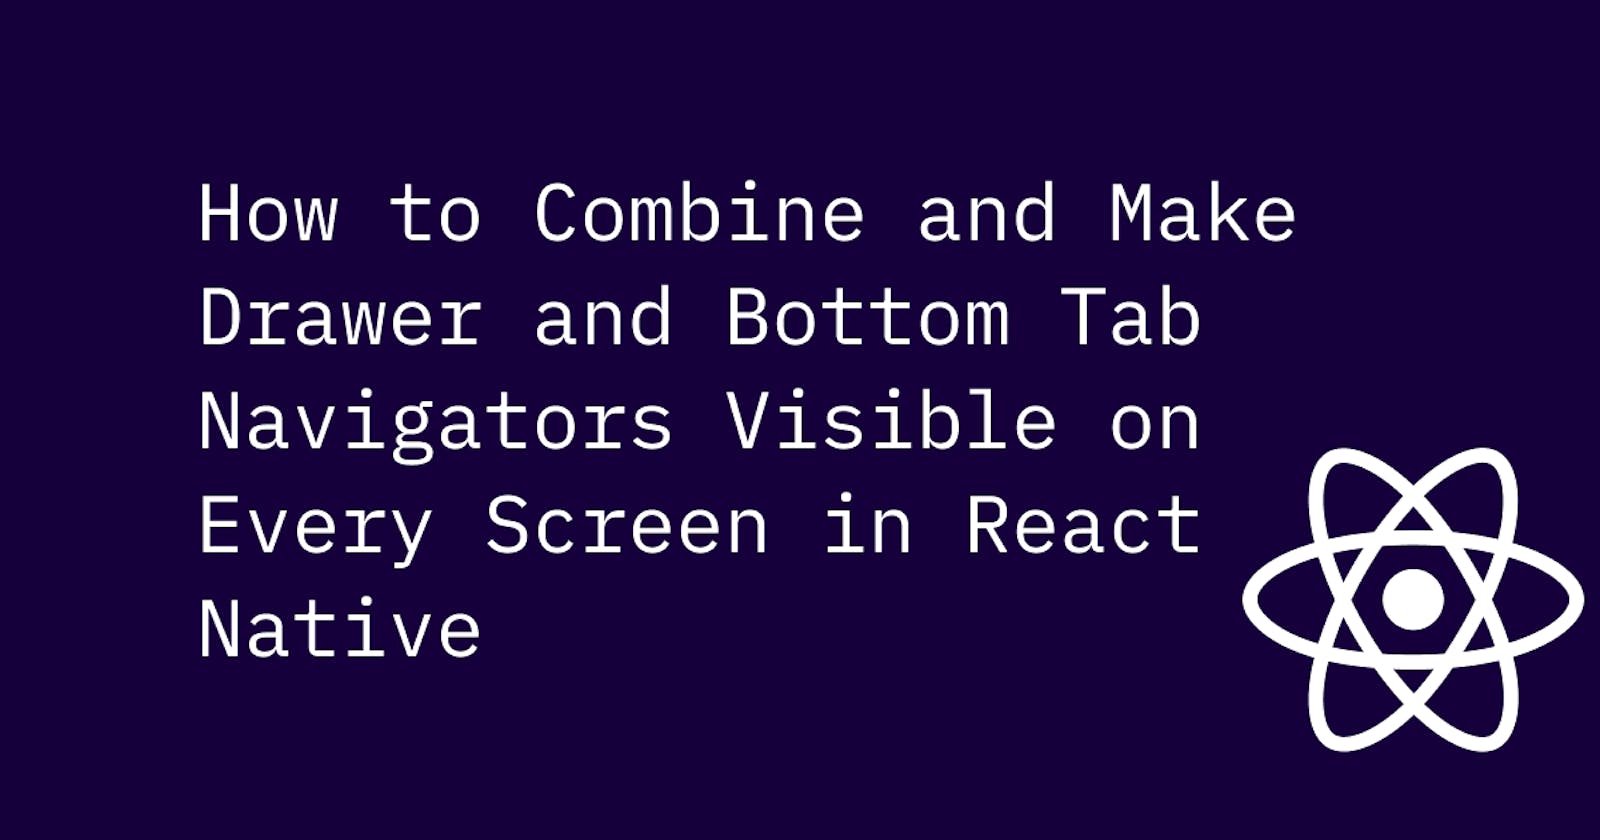 How to Combine and Make Drawer and Bottom Tab Navigators Visible on Every Screen in React Native